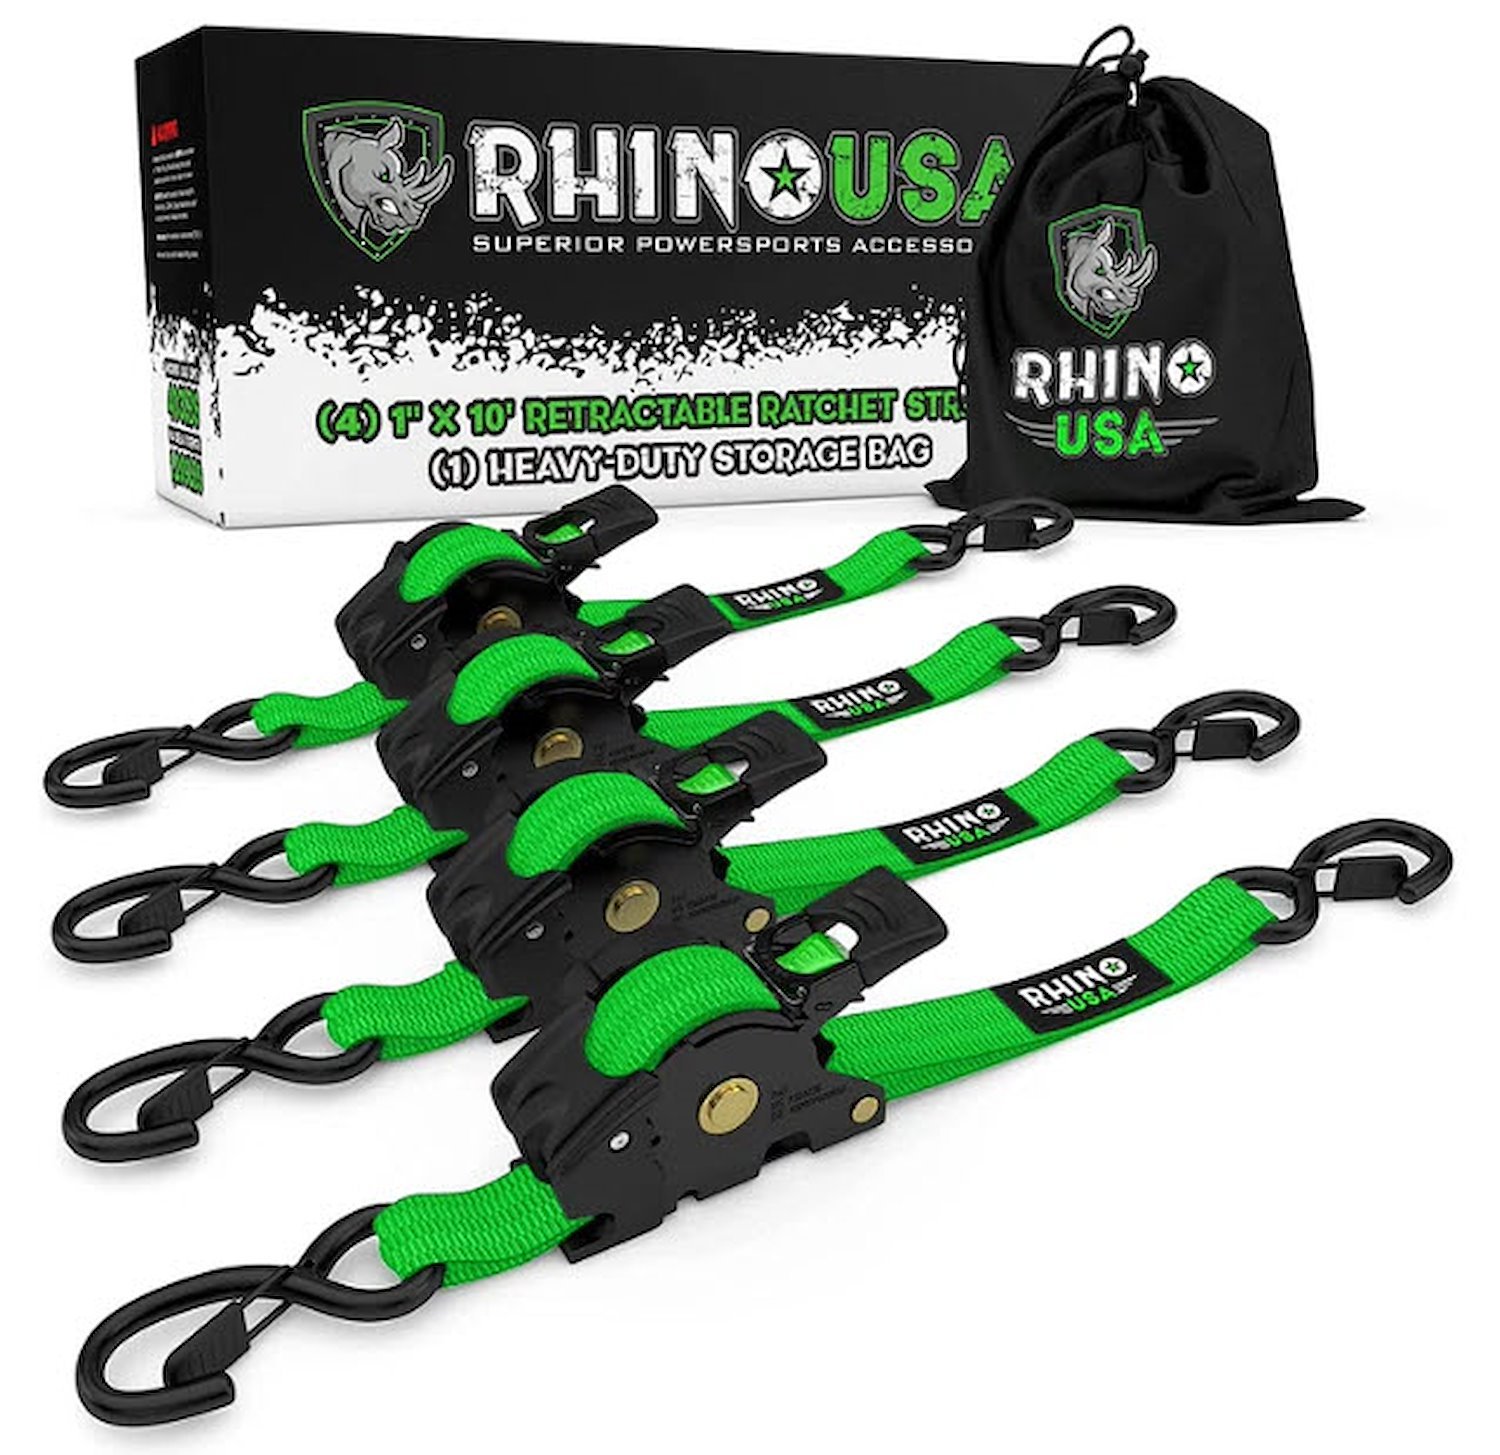 TD-RSRE1X10-GRN-R 1 in. x 10 ft. Retractable Ratchet Straps [Green]